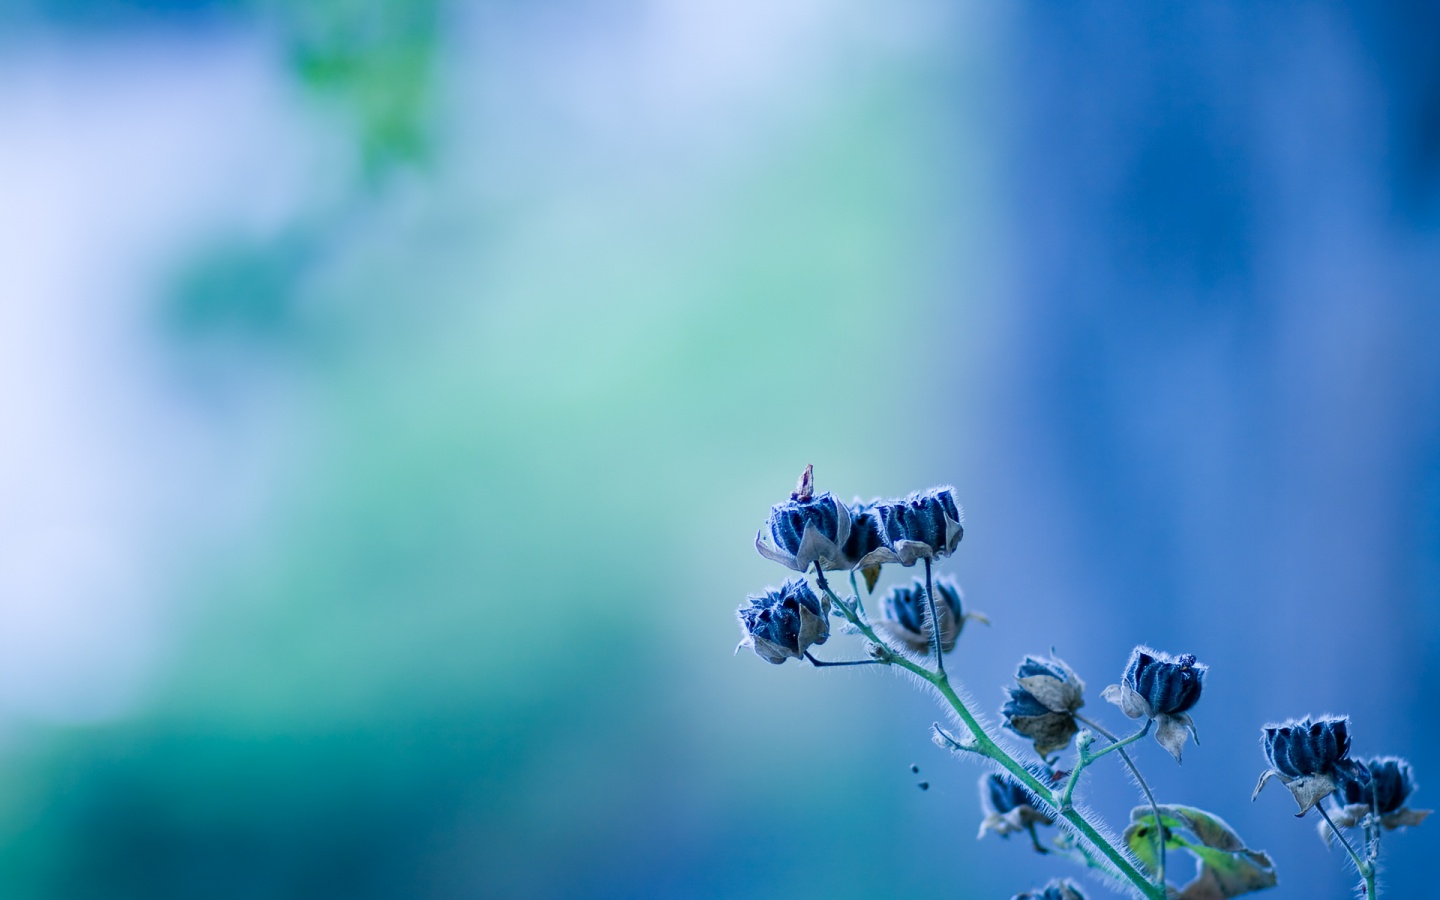 Small Blue Flowers